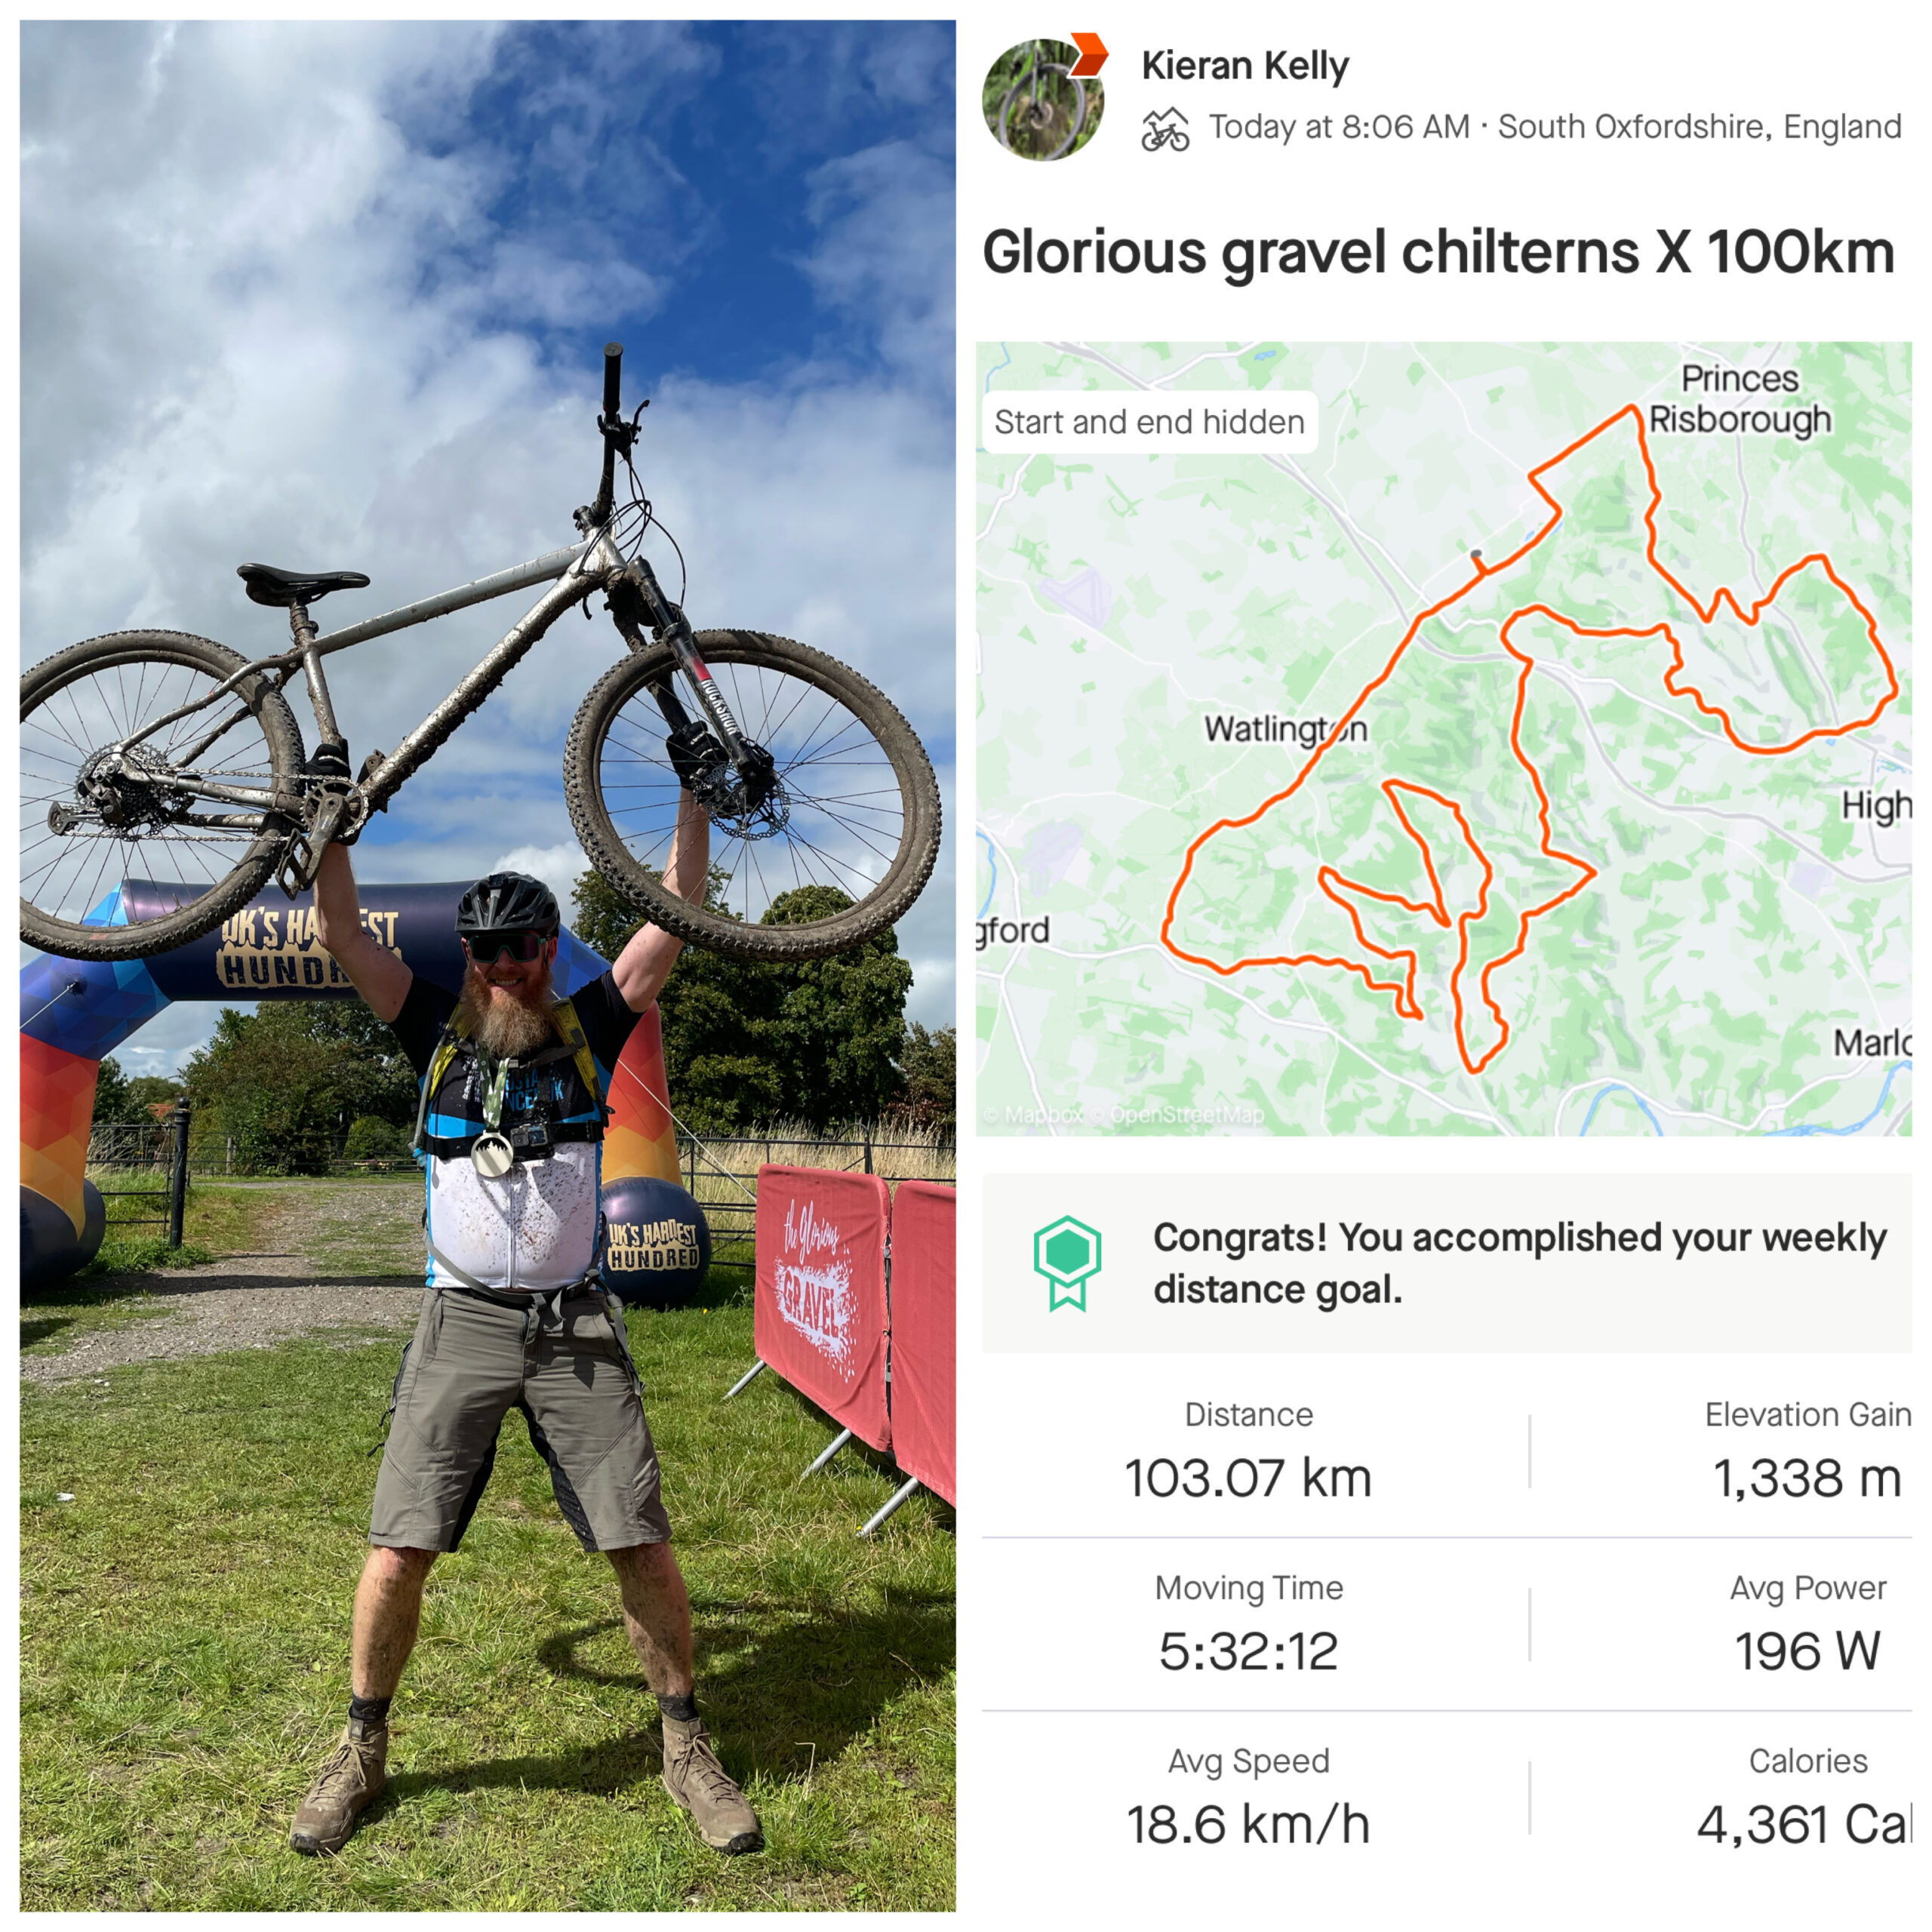 Kieran Kelly with bike overhead on completing the Chilterns x 100km bike ride